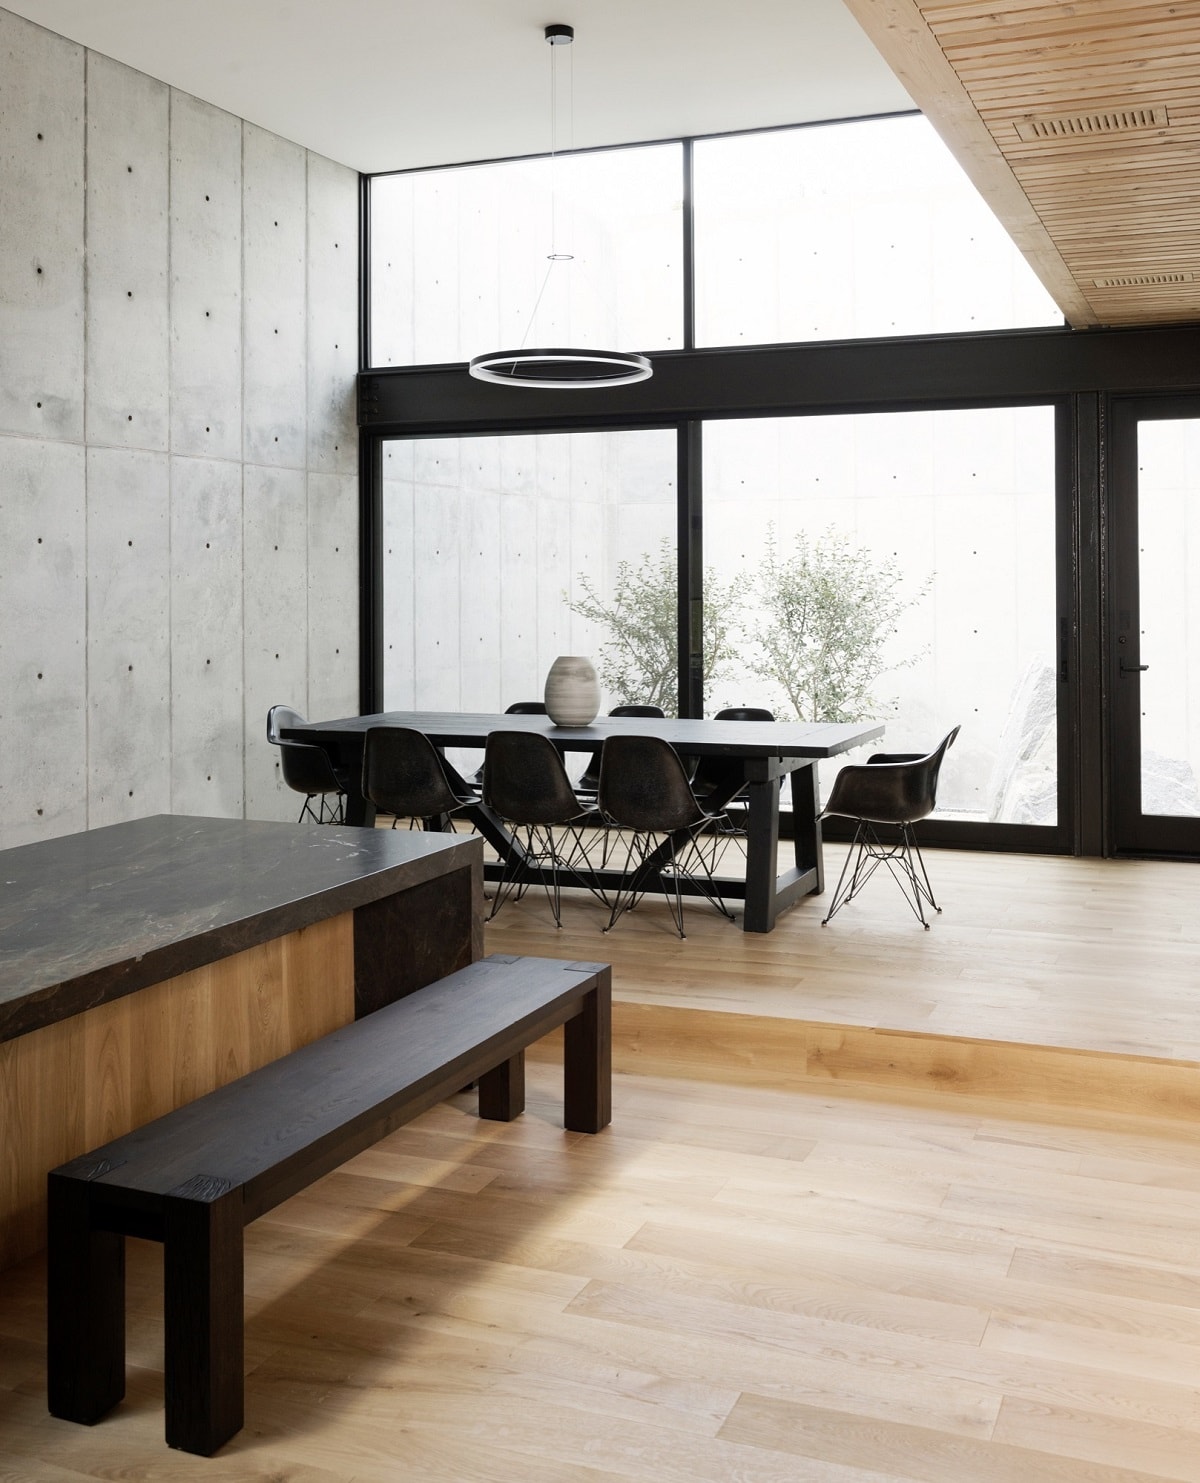 Concrete x Wooden Home by Robertson Design